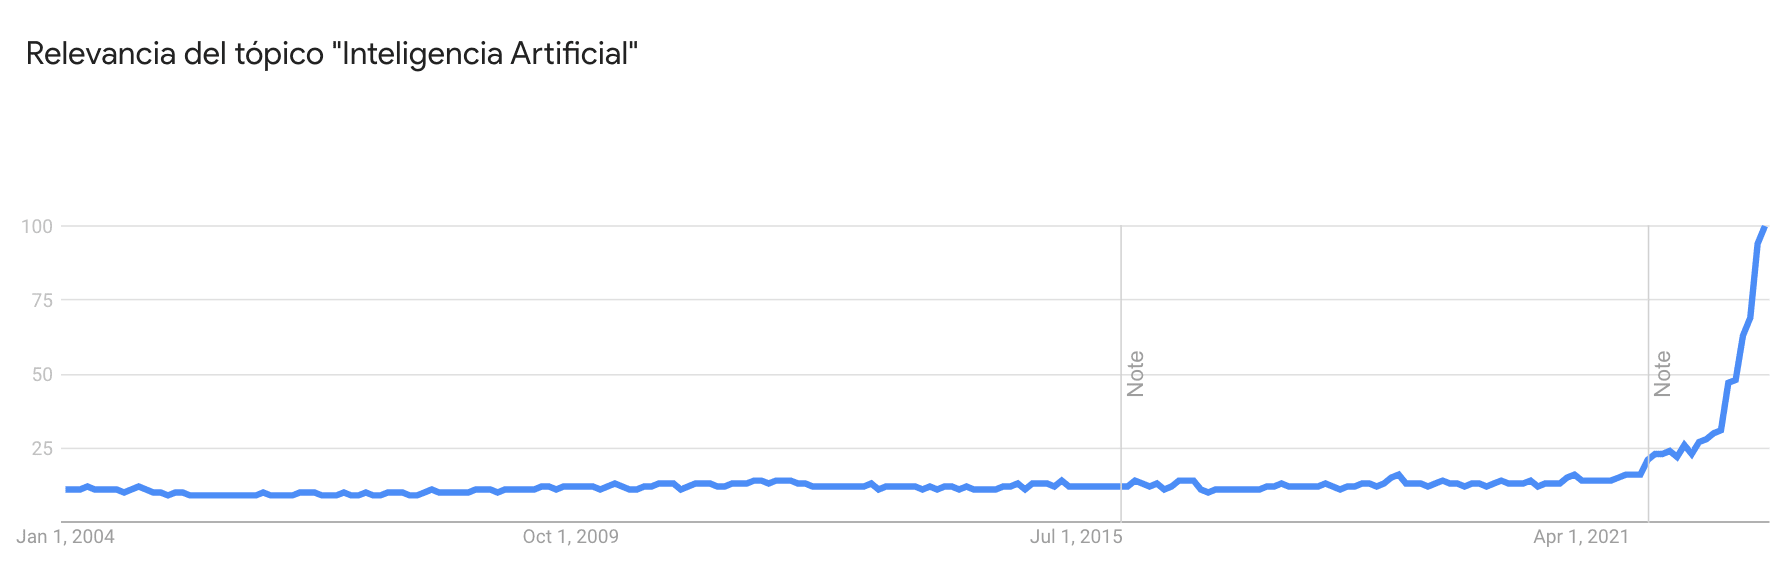 Google Trends "Artificial inteligence" interest over time